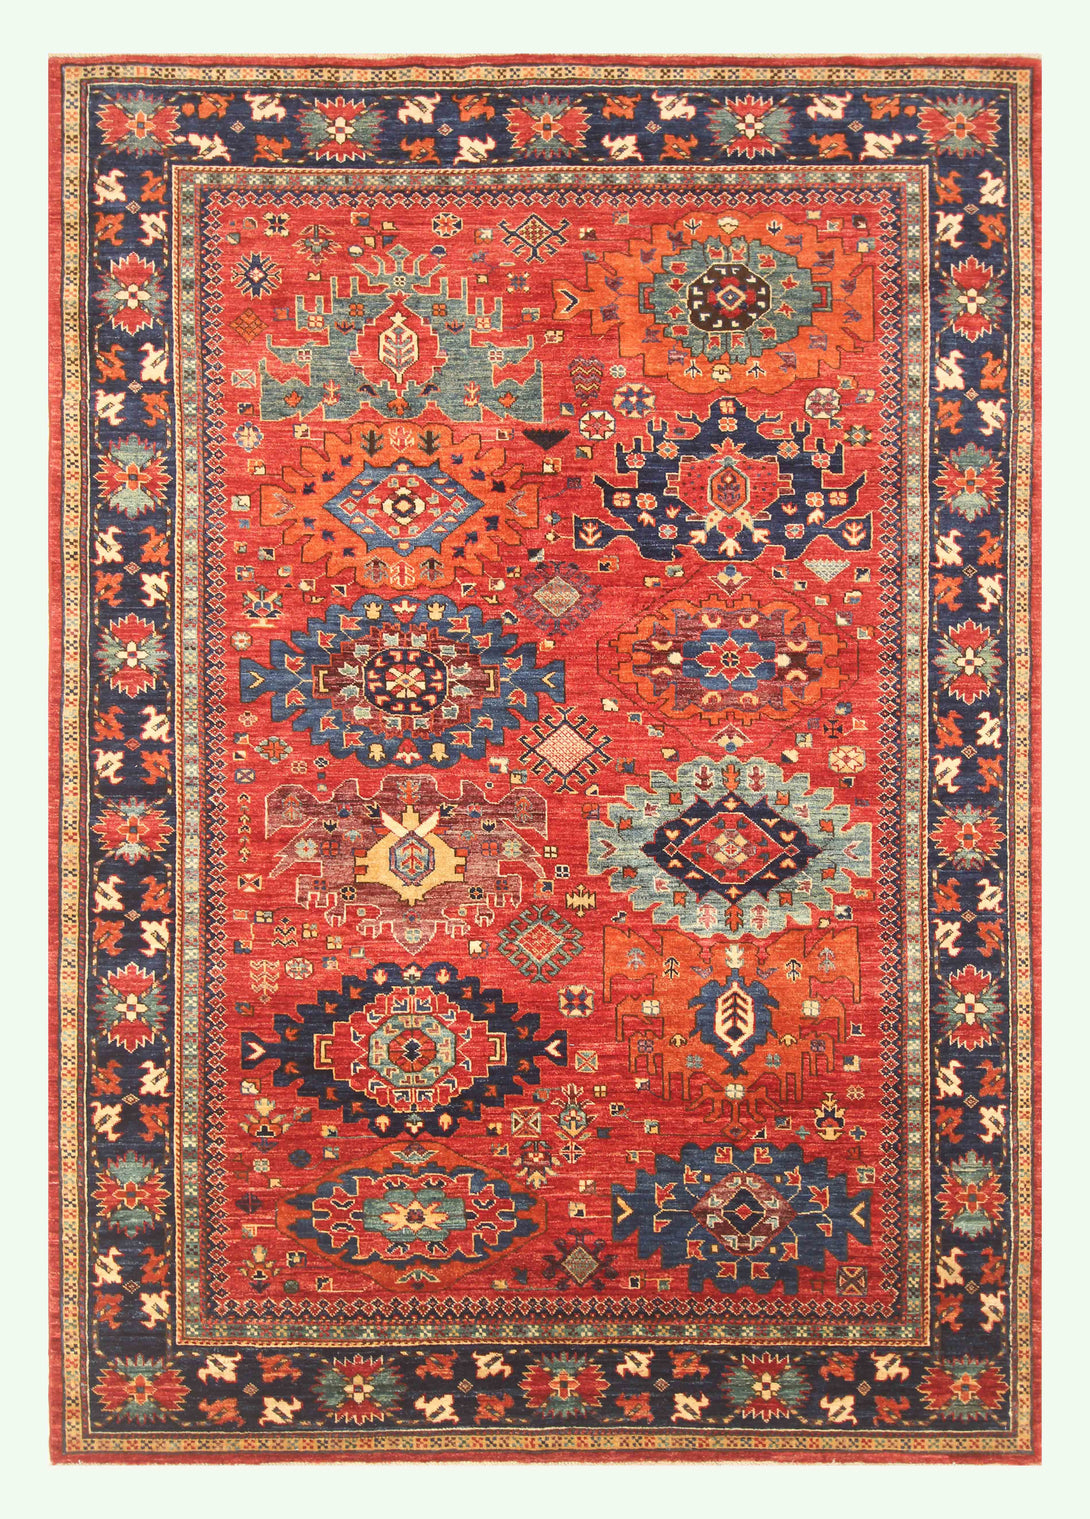 Hand Knotted Afghani Fine Aryana Area Rug > Design# CCATR112548 > Size: 5'-9" x 8'-10"